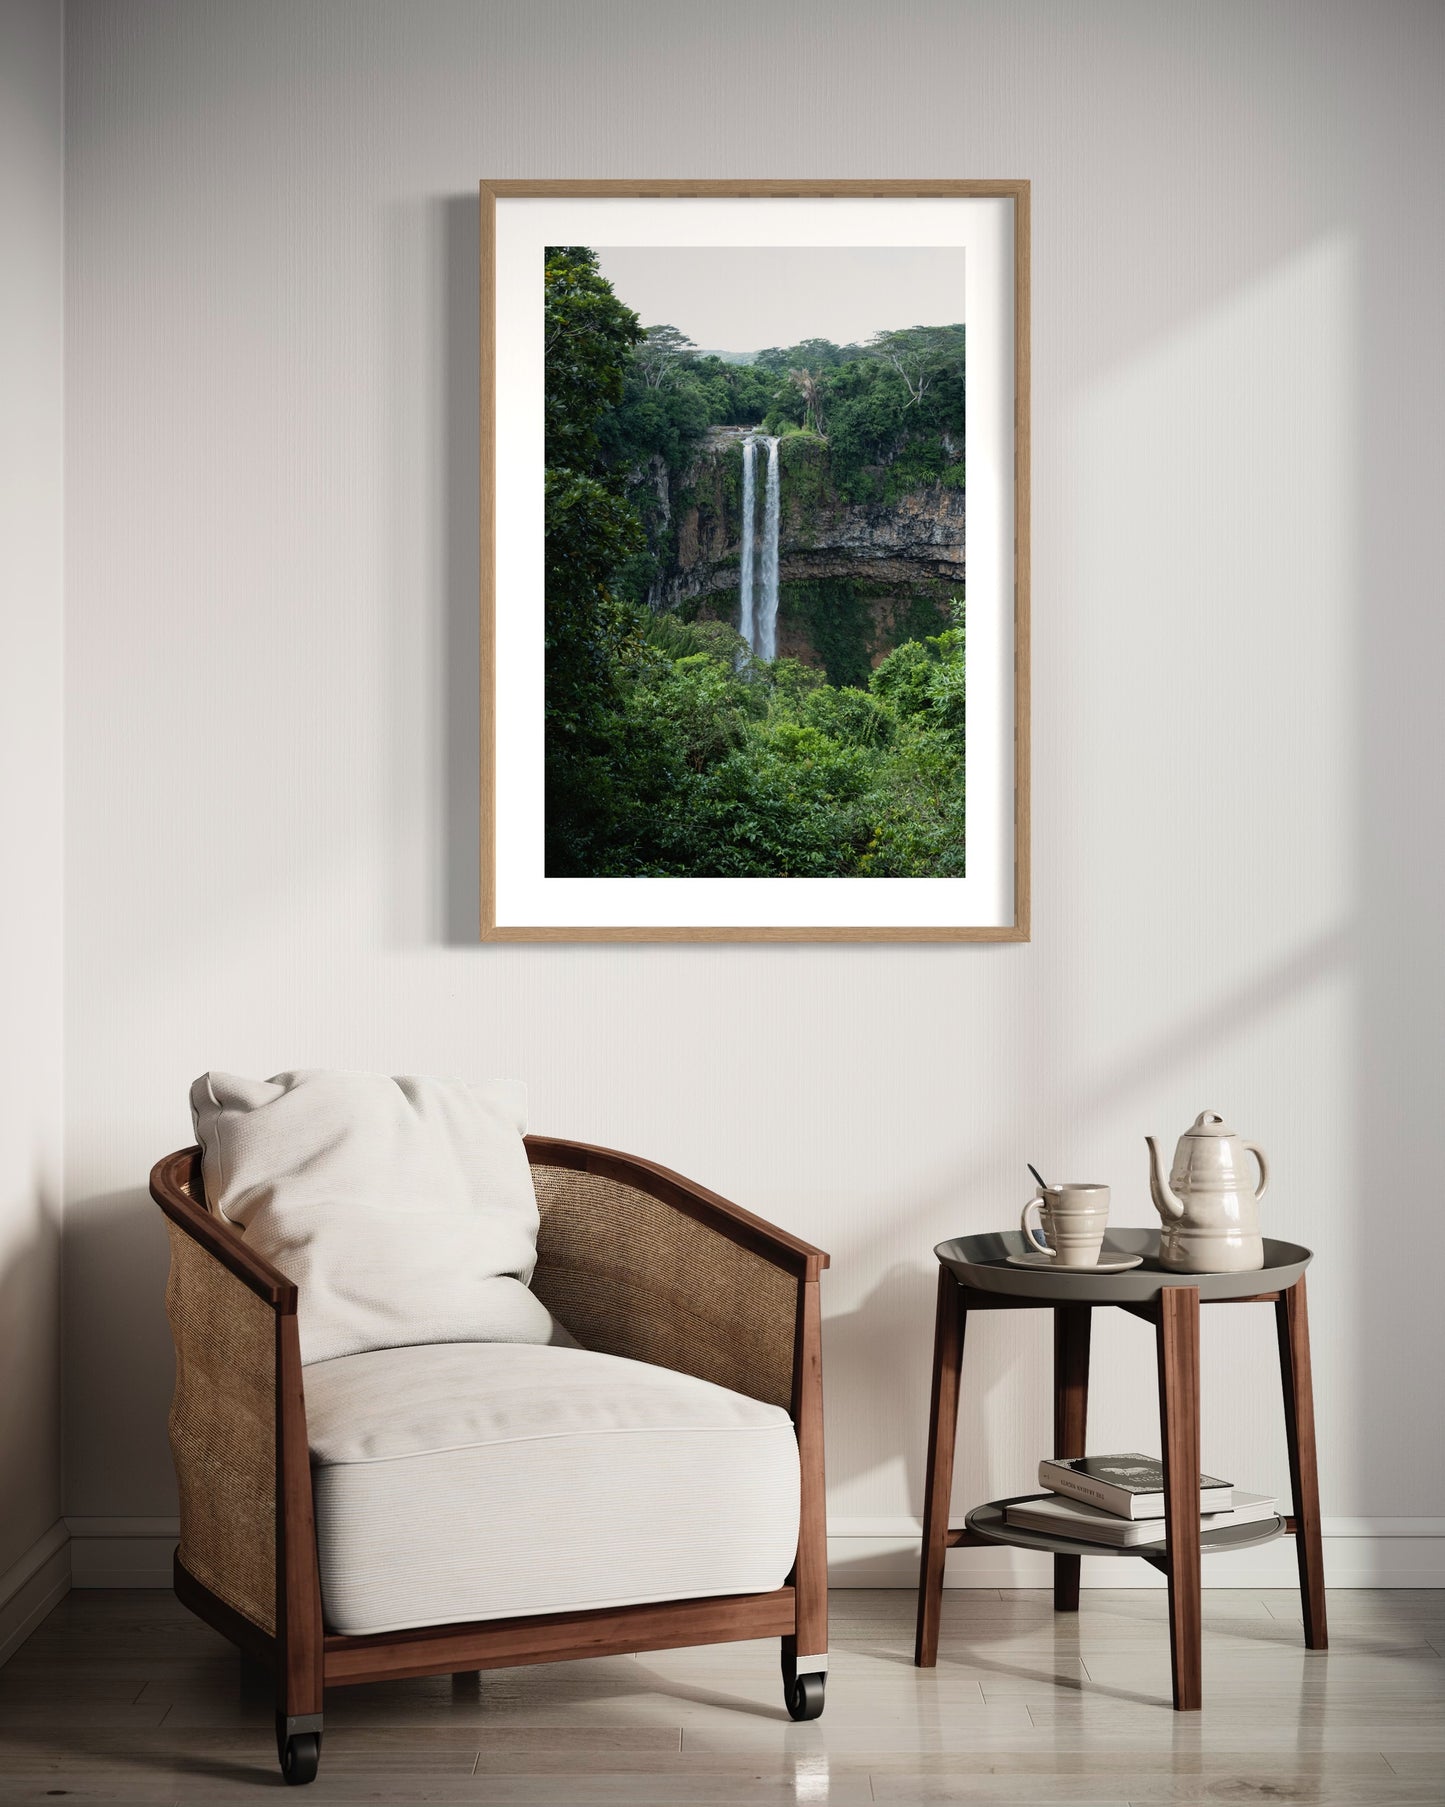 Chamarel Waterfall, Mauritius - Giclée Print on Hahnemühle German Etching paper